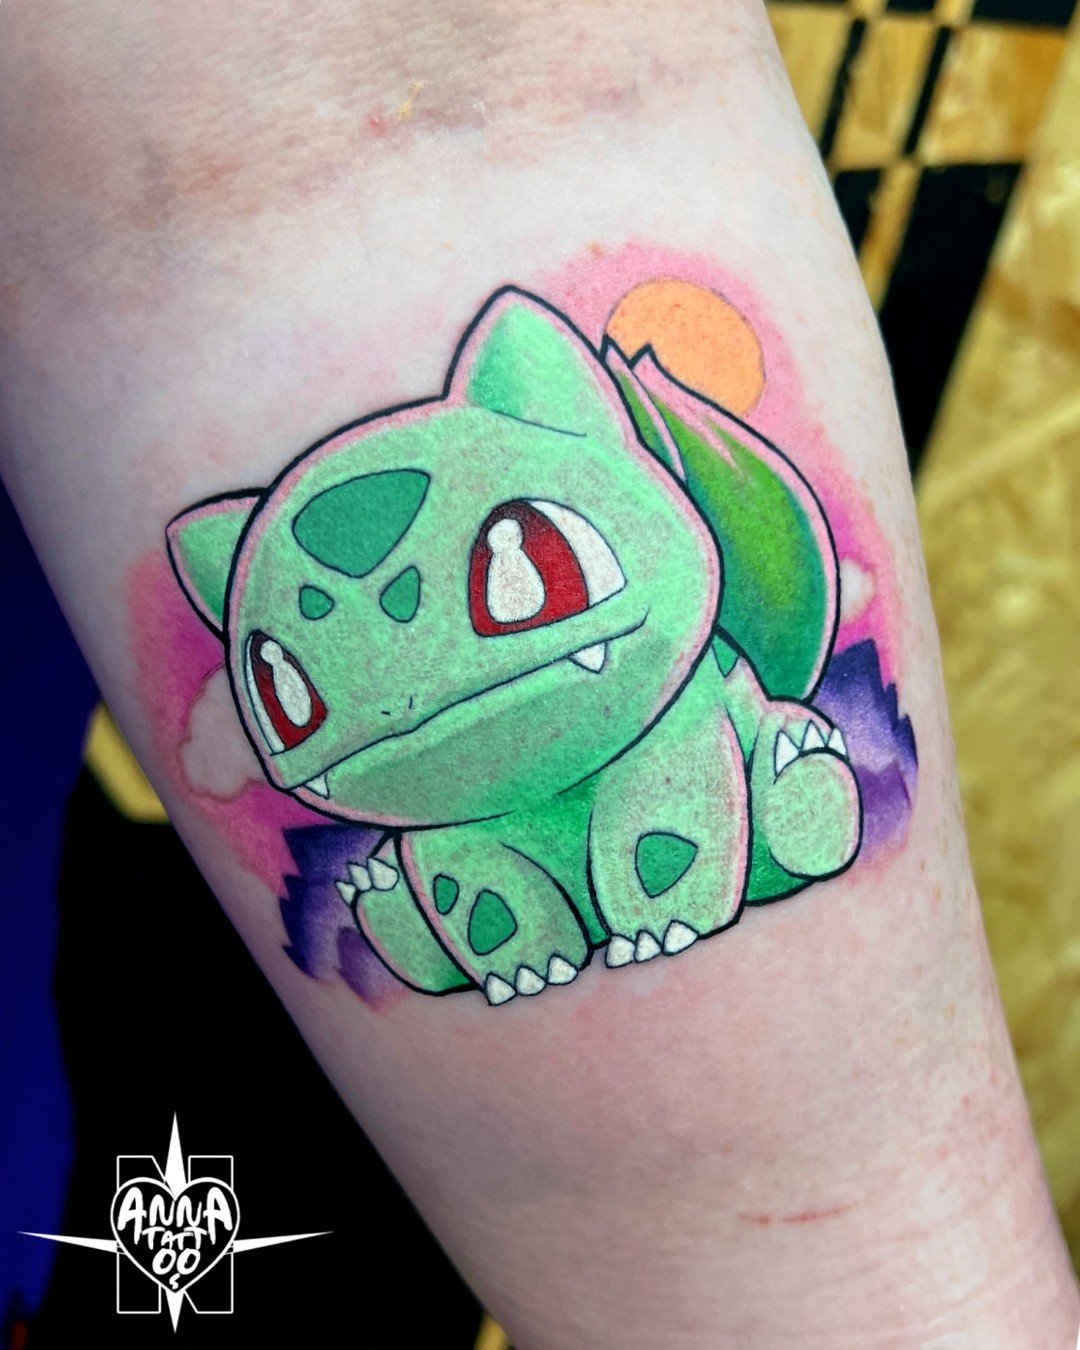 Found in grassy areas, such as forests and plains, Bulbasaur is a grass-type character and it is so cute. Get a tattoo of this adorable creature on your arm!